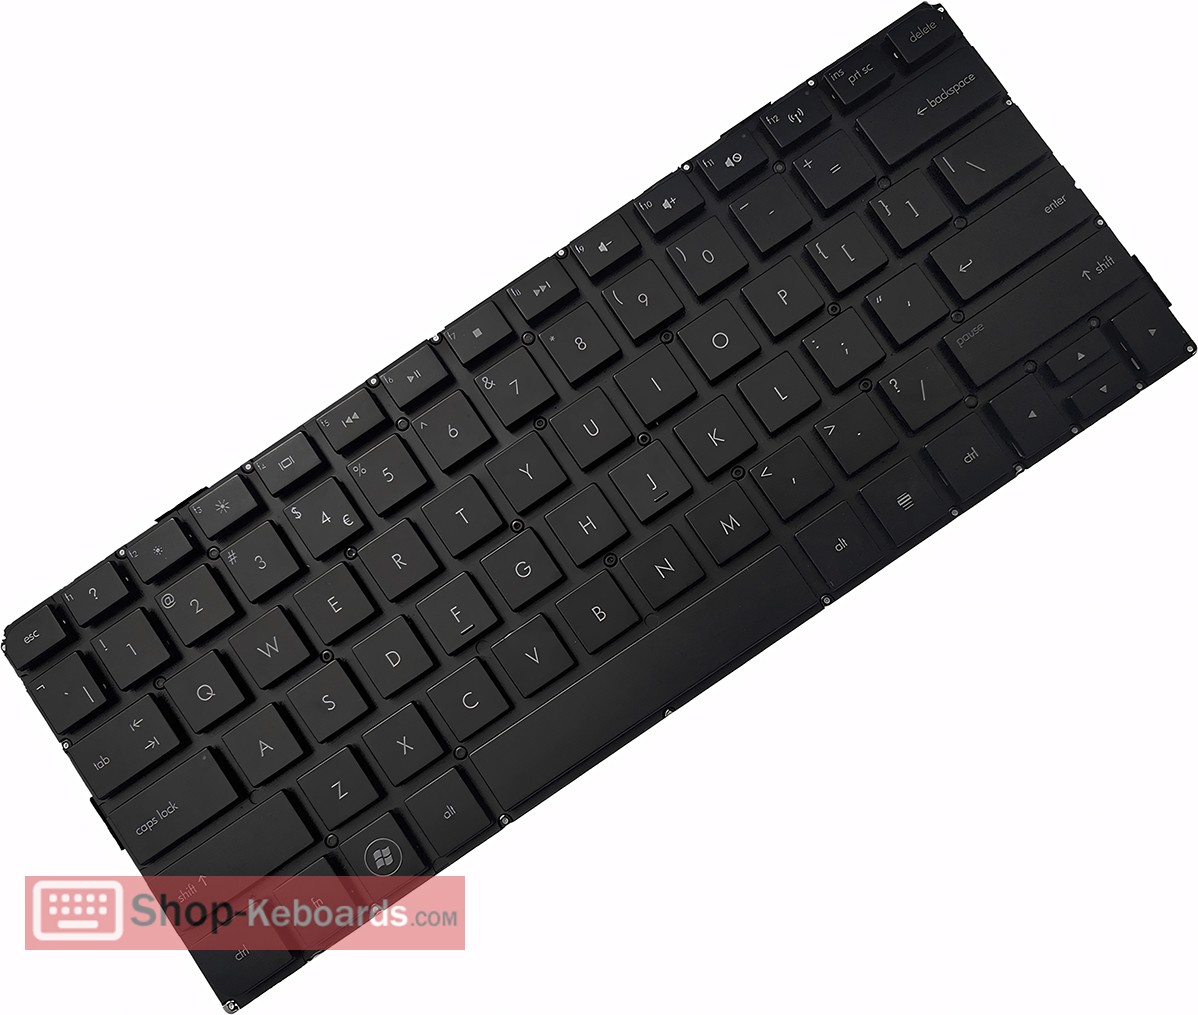 HP ENVY 13-1015ER  Keyboard replacement